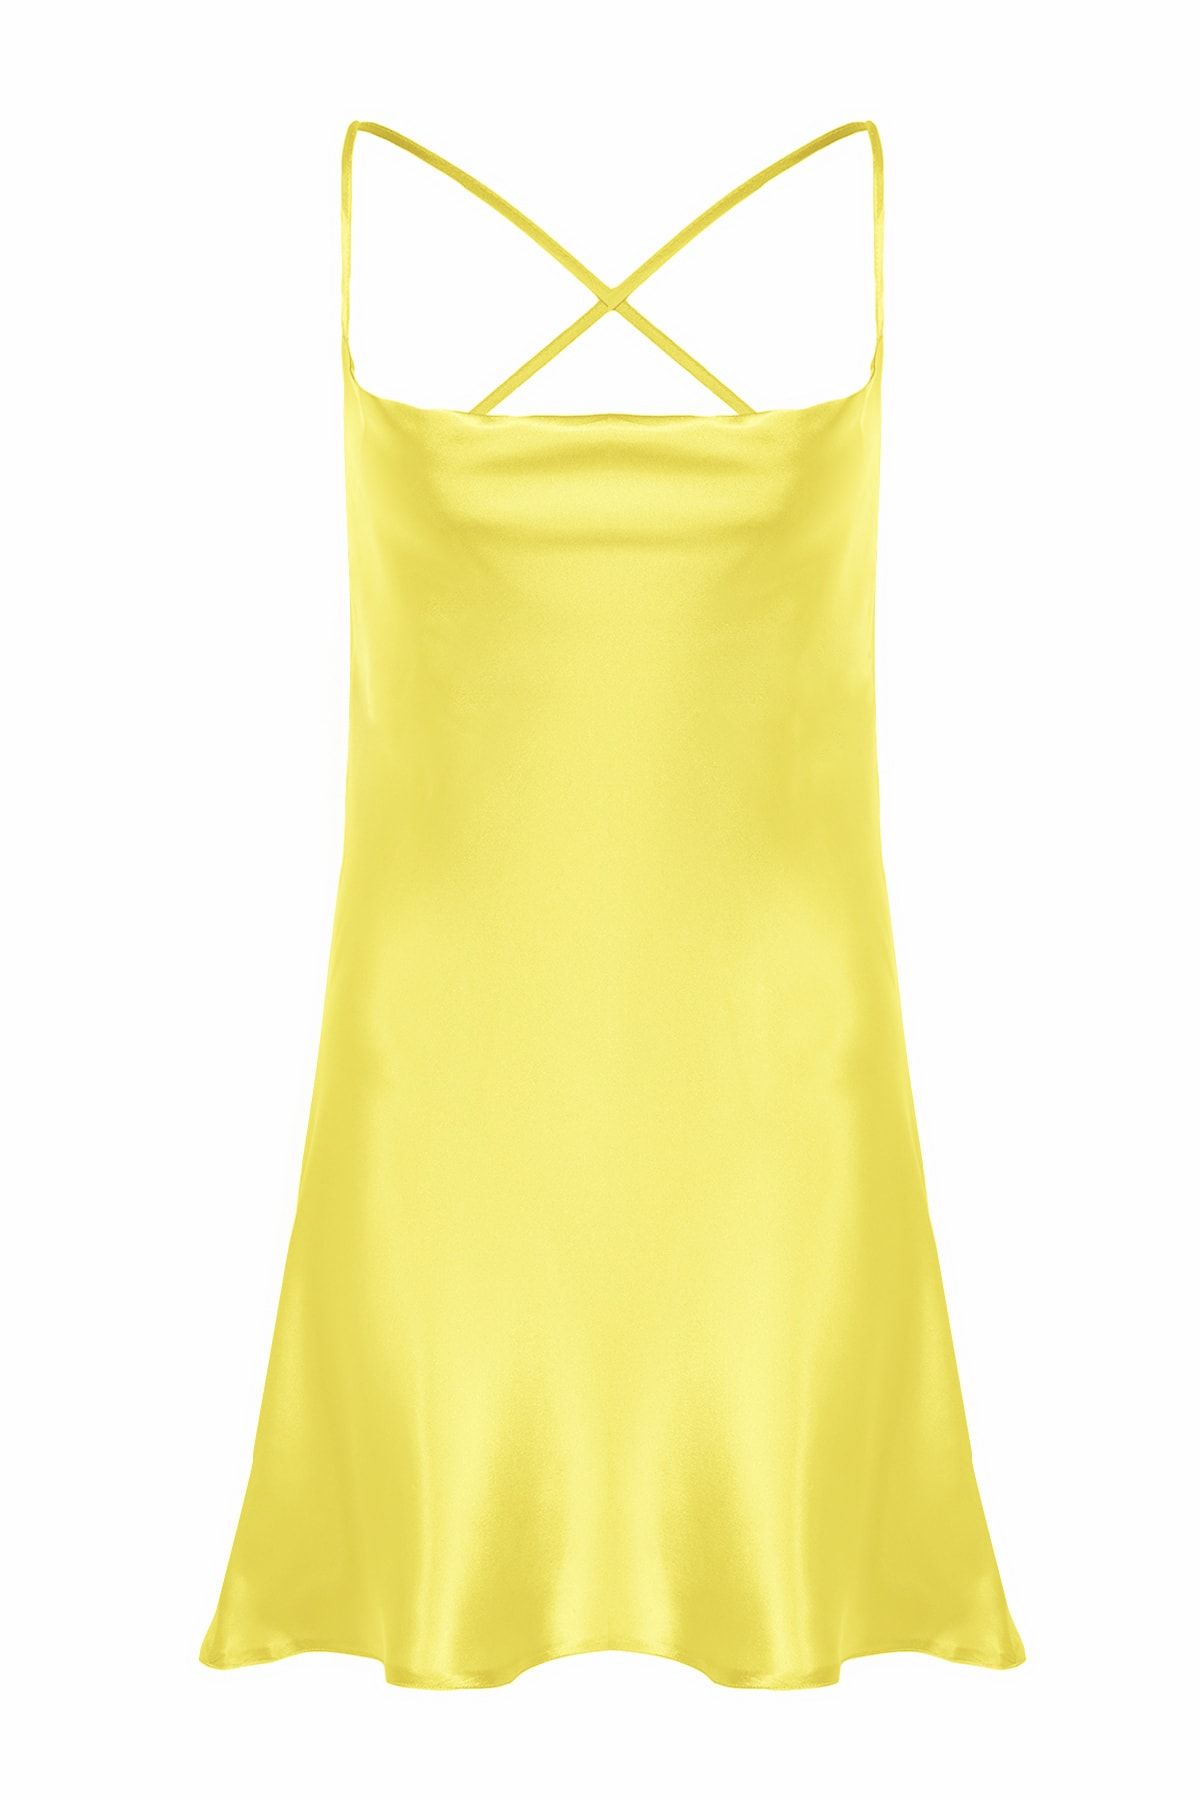 Cottonhill Yellow Women Nightgowns Styles, Prices - Trendyol